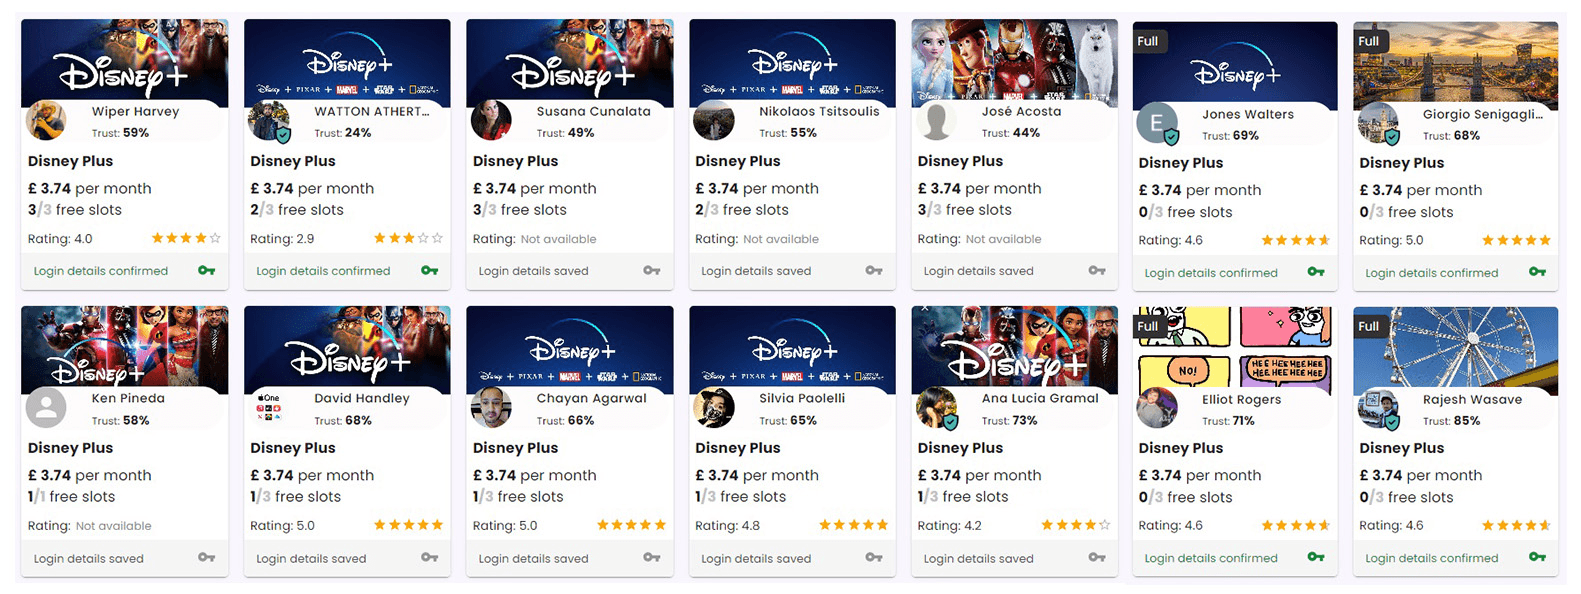 Whether you become an Admin or a Joiner you can save up to 75% on Disney Plus with Together Price. So no worries about the price rise here or with other future brands! We've got your back!